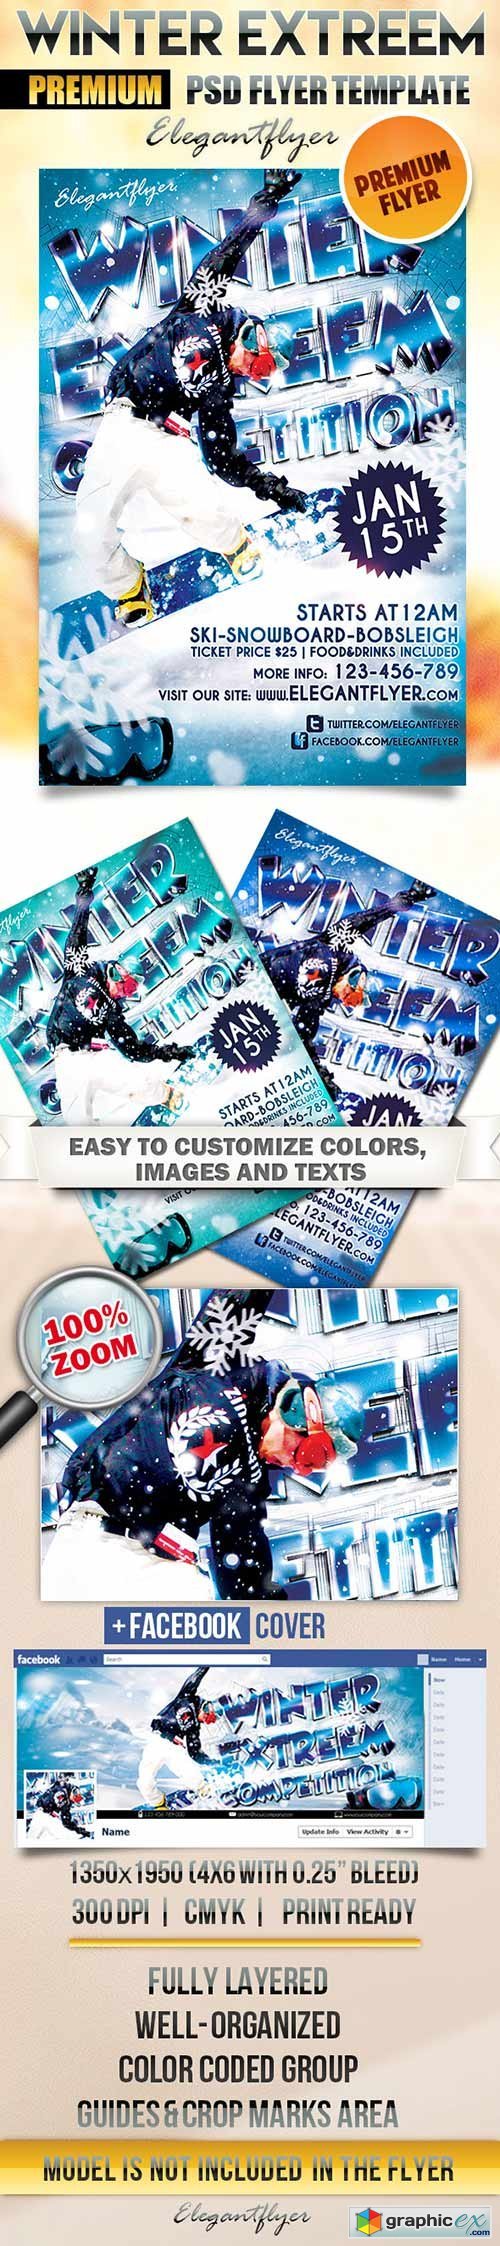 Winter Extreem Competition Flyer PSD Template + Facebook Cover